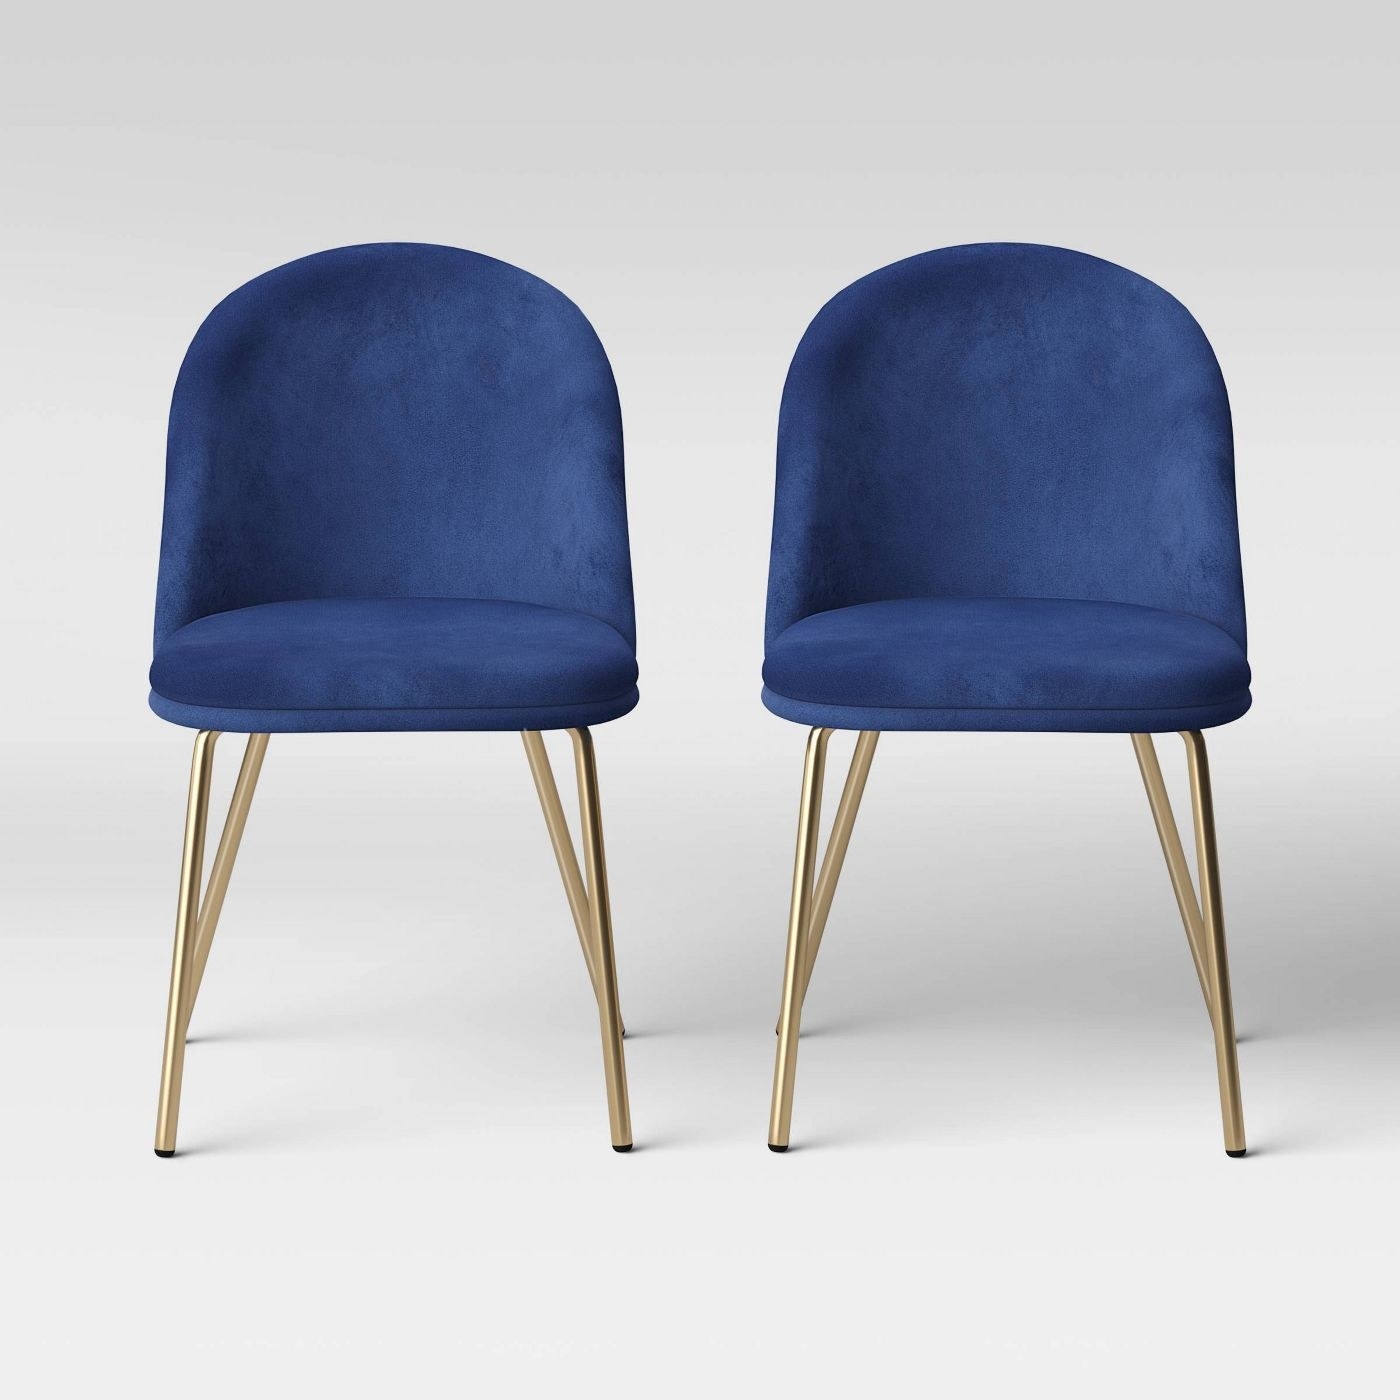 Two navy blue chairs with circular with gold legs 